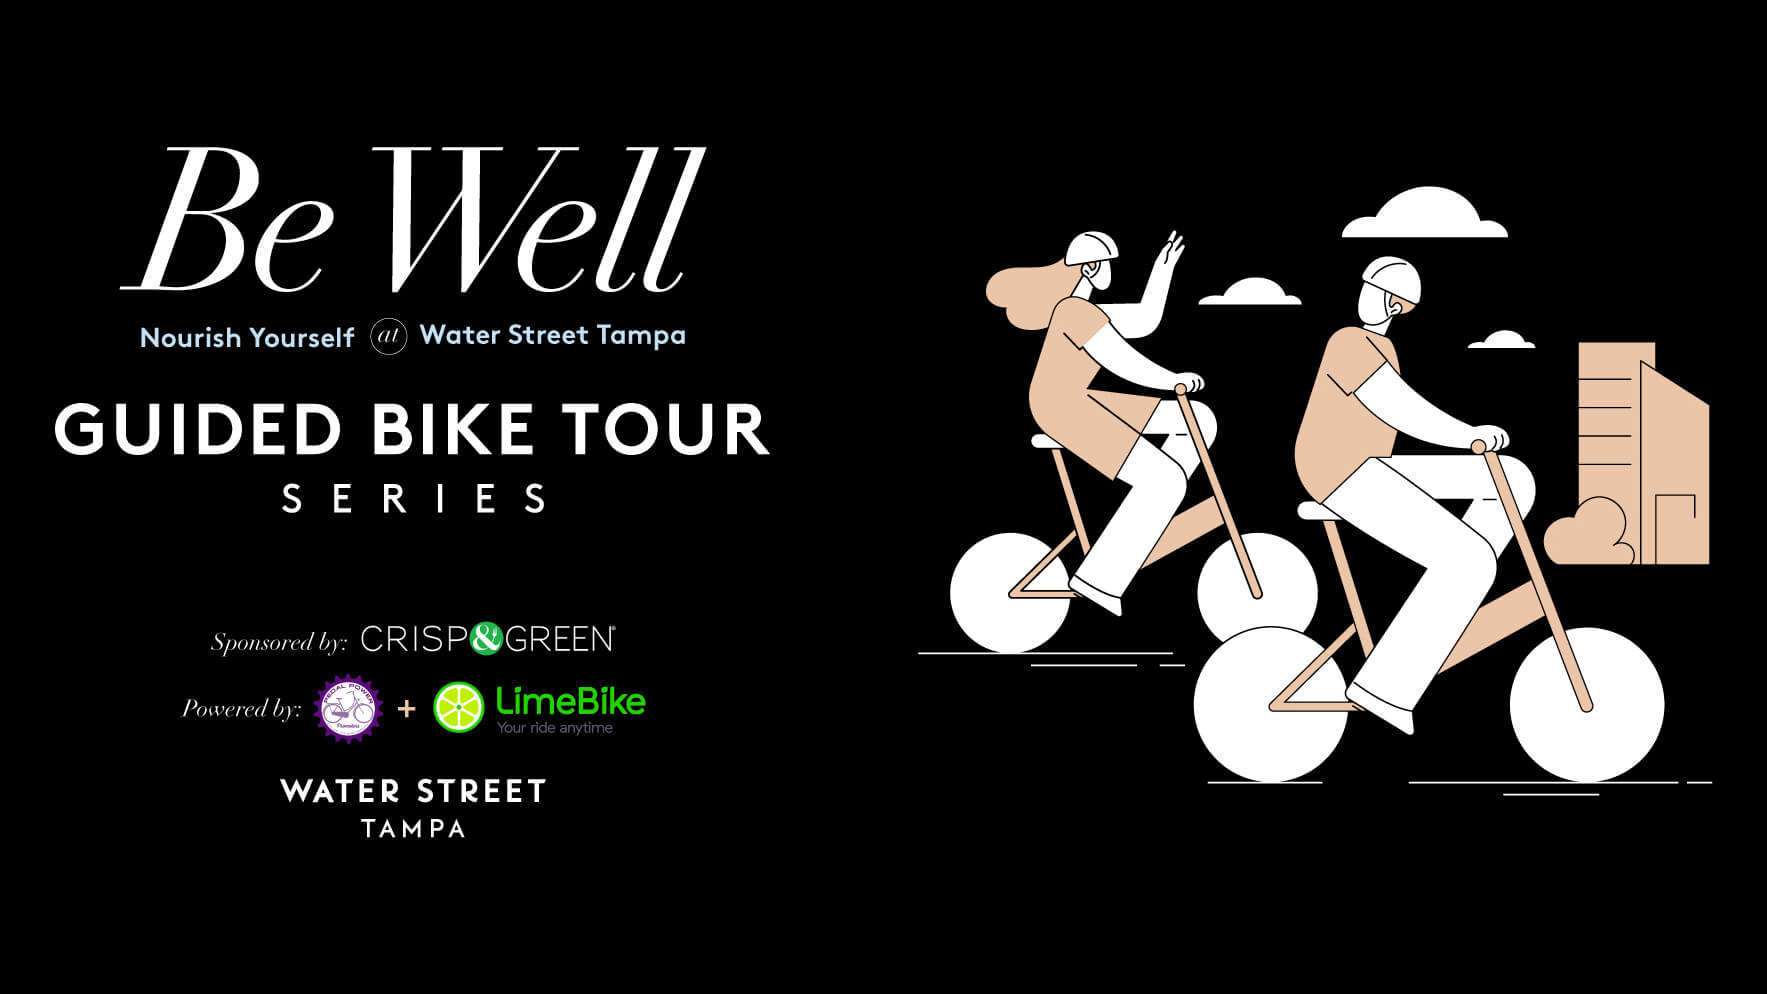 Be Well Guided Bike Tour marketing graphic